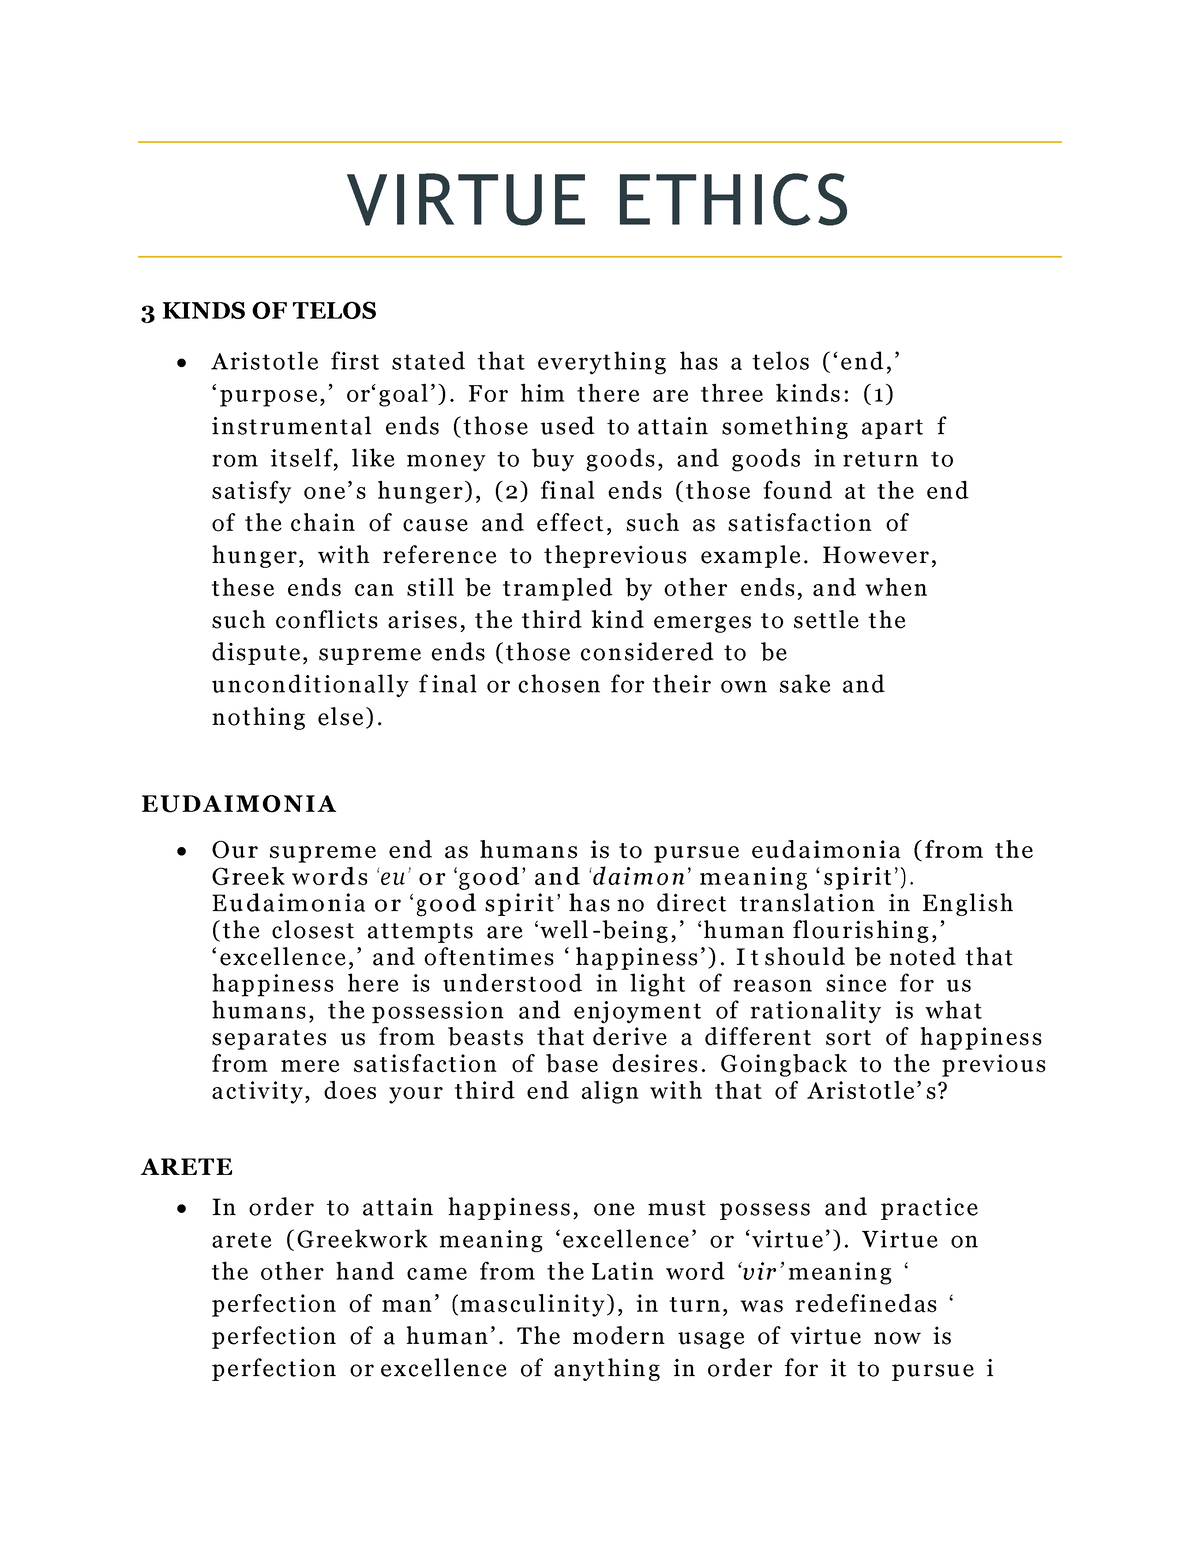 case study for virtue ethics